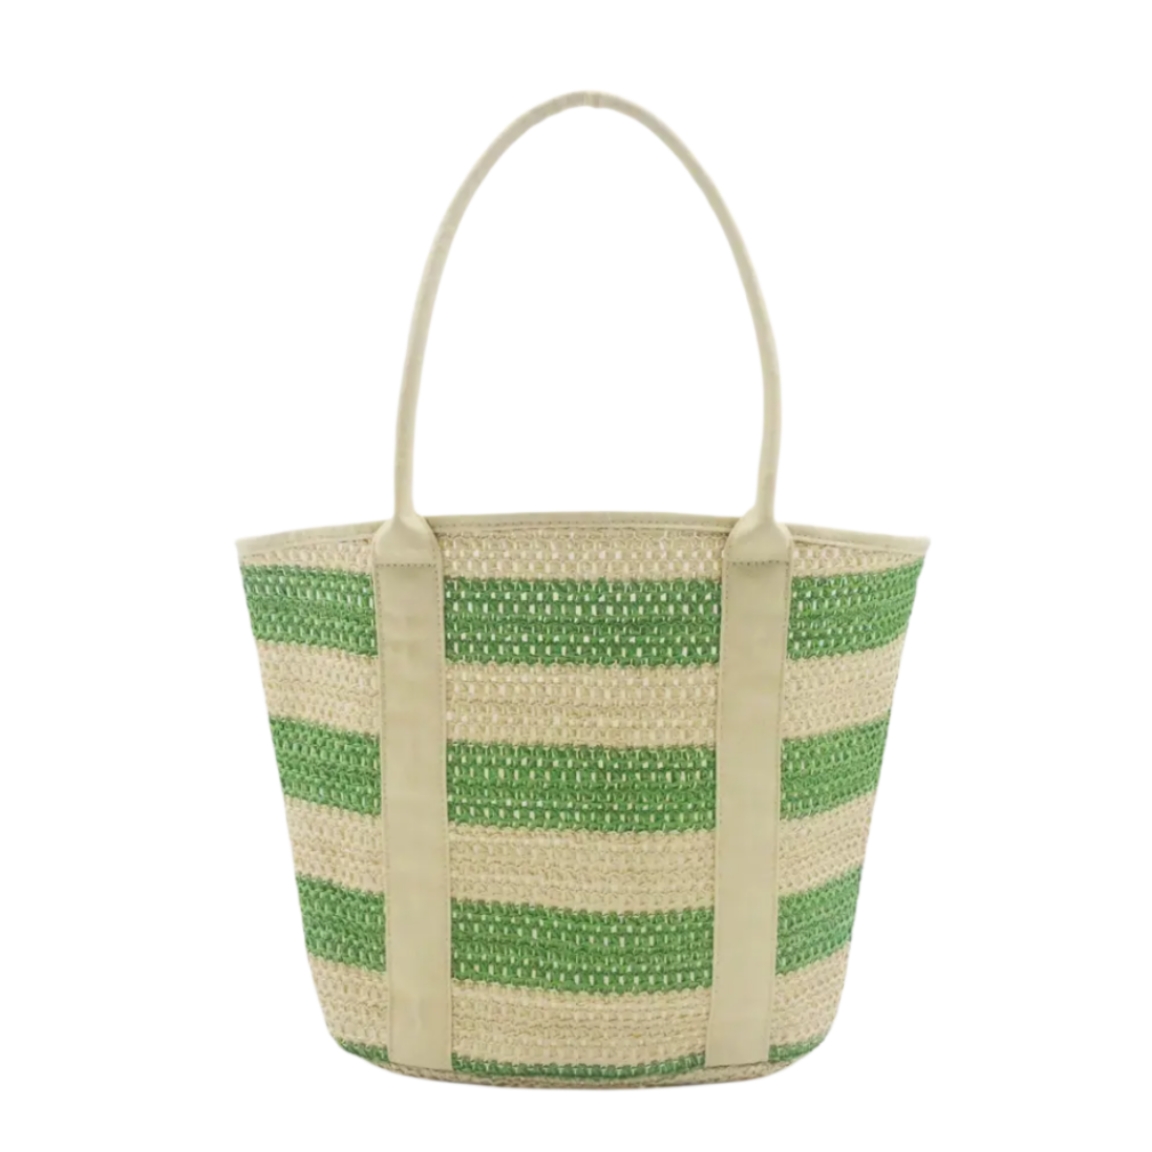 New Product Eco-friendly Paper Straw Tote Bag Green Stripped Pattern Corn Husks Tote Bag Sustainable Straw Summer Beach Tote Bag